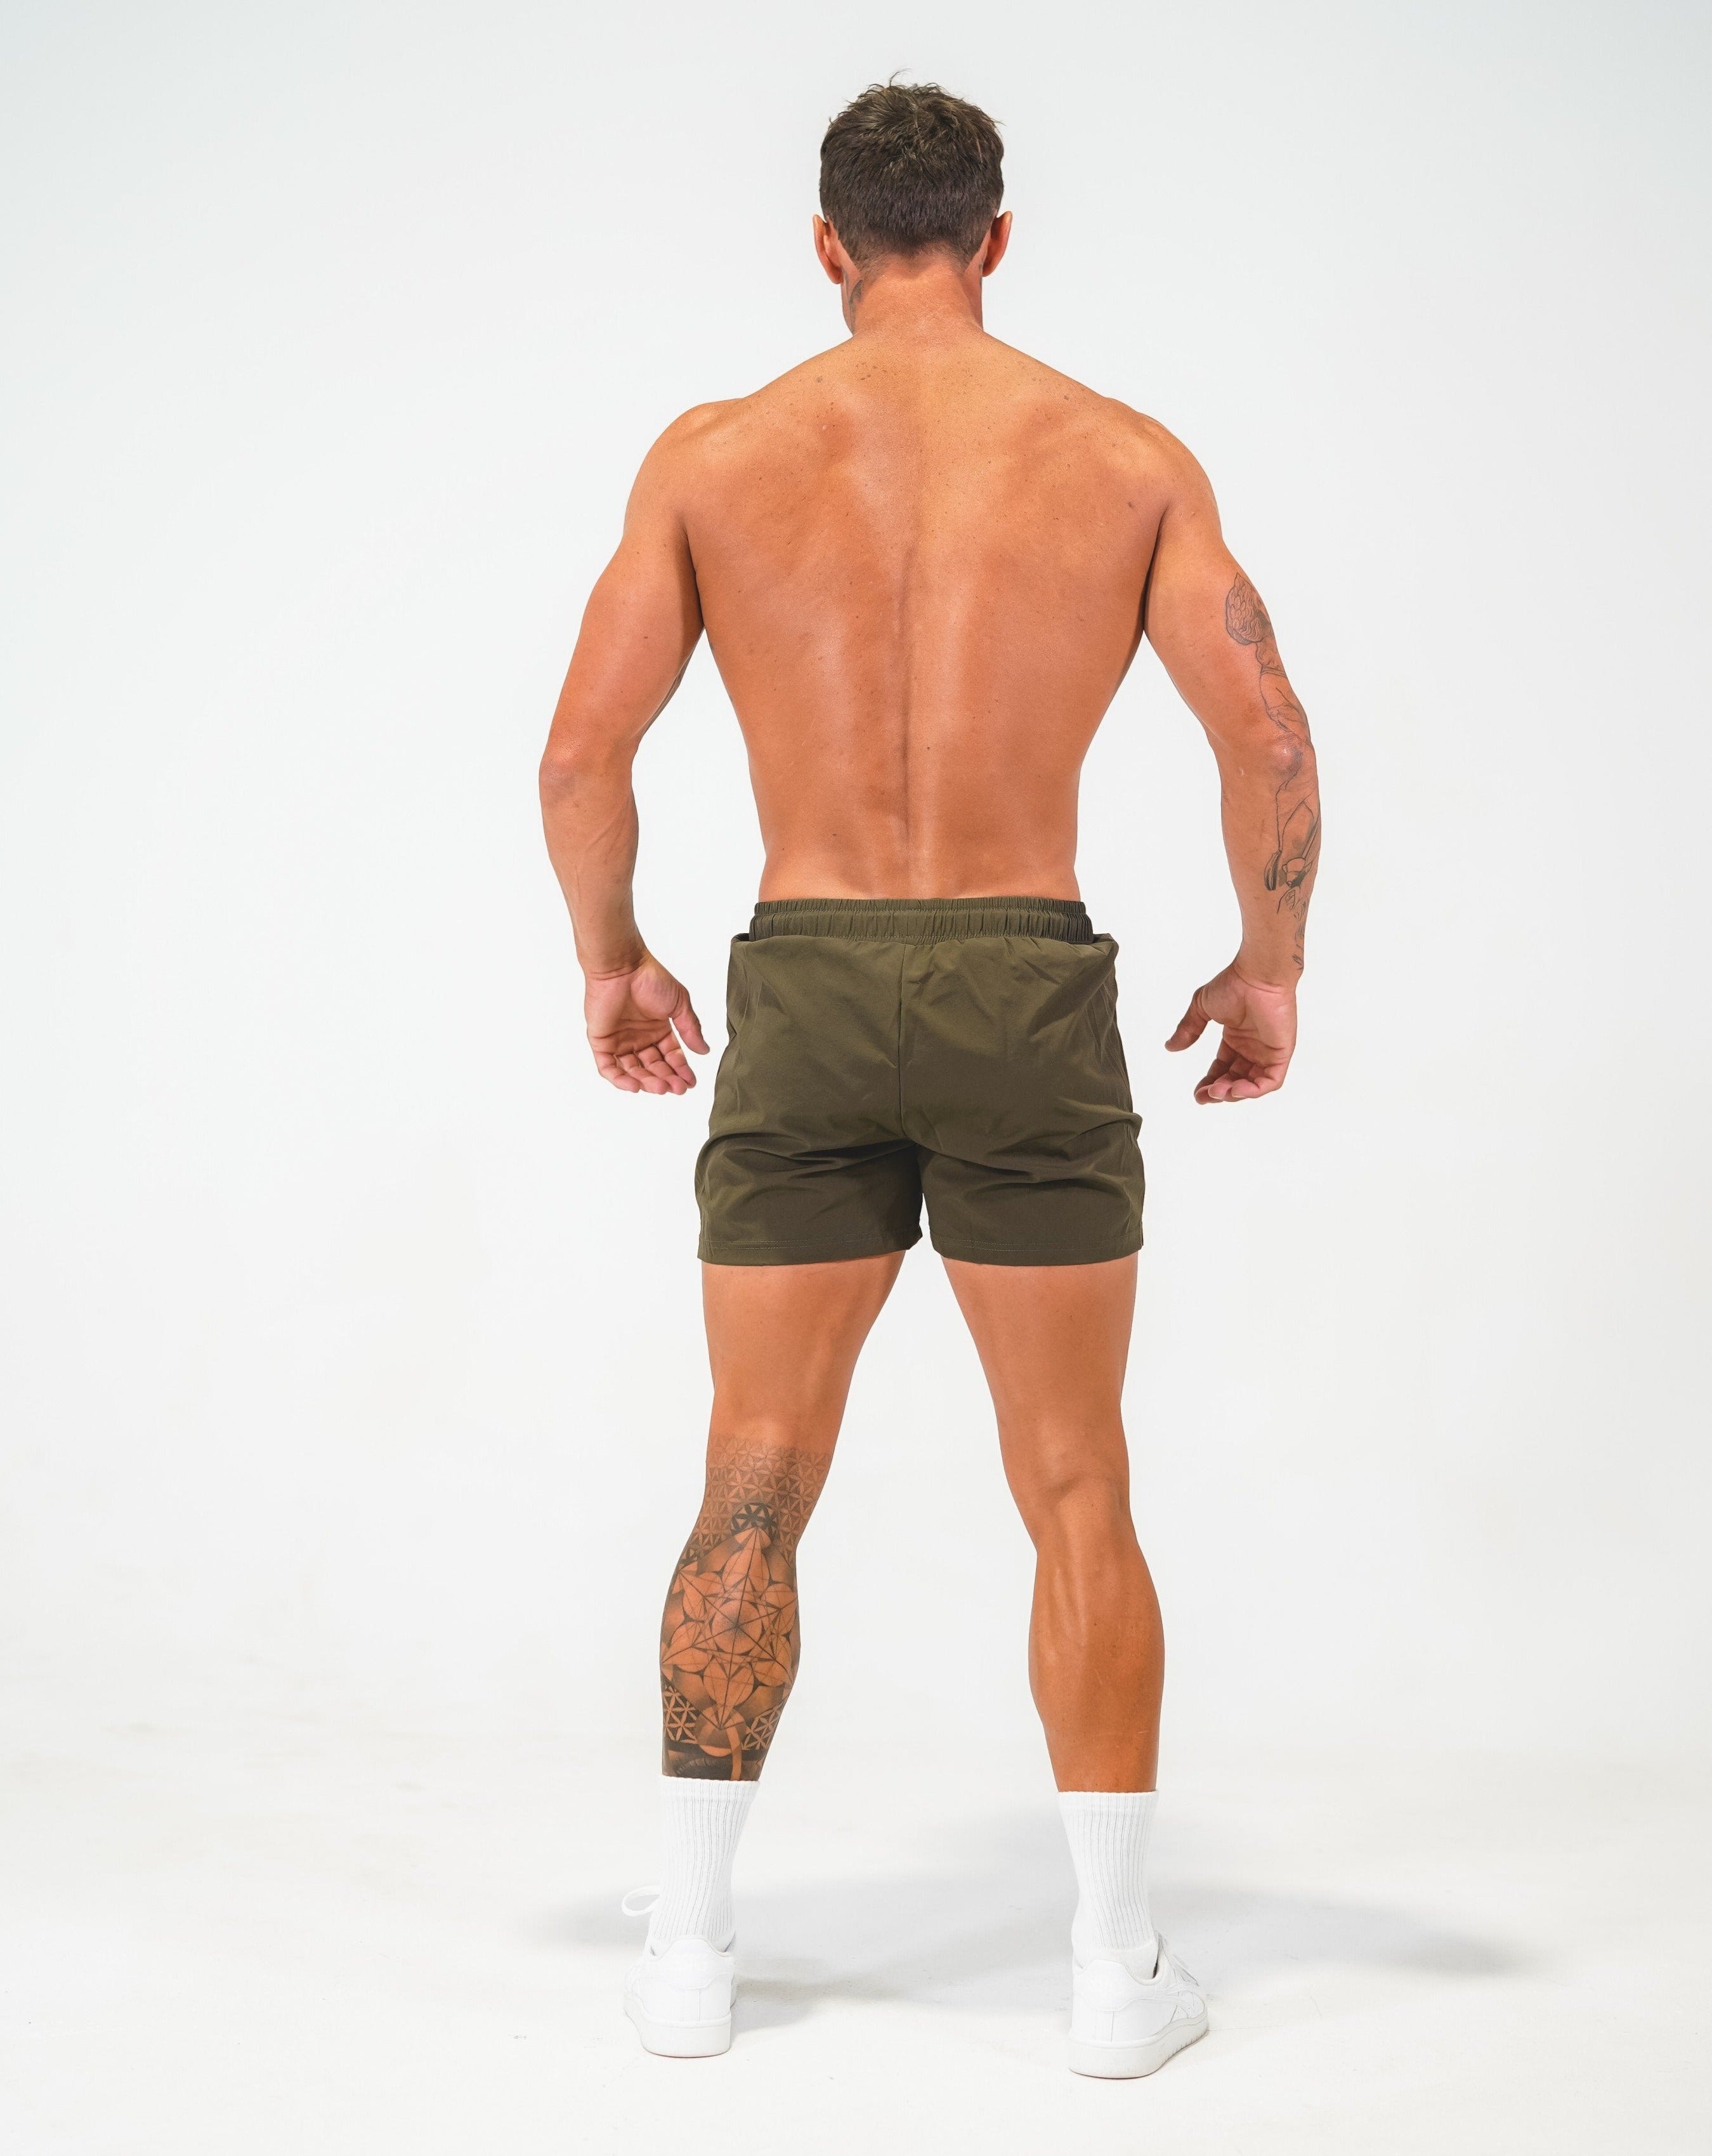 Roo Shorts - Olive - GYMROOS